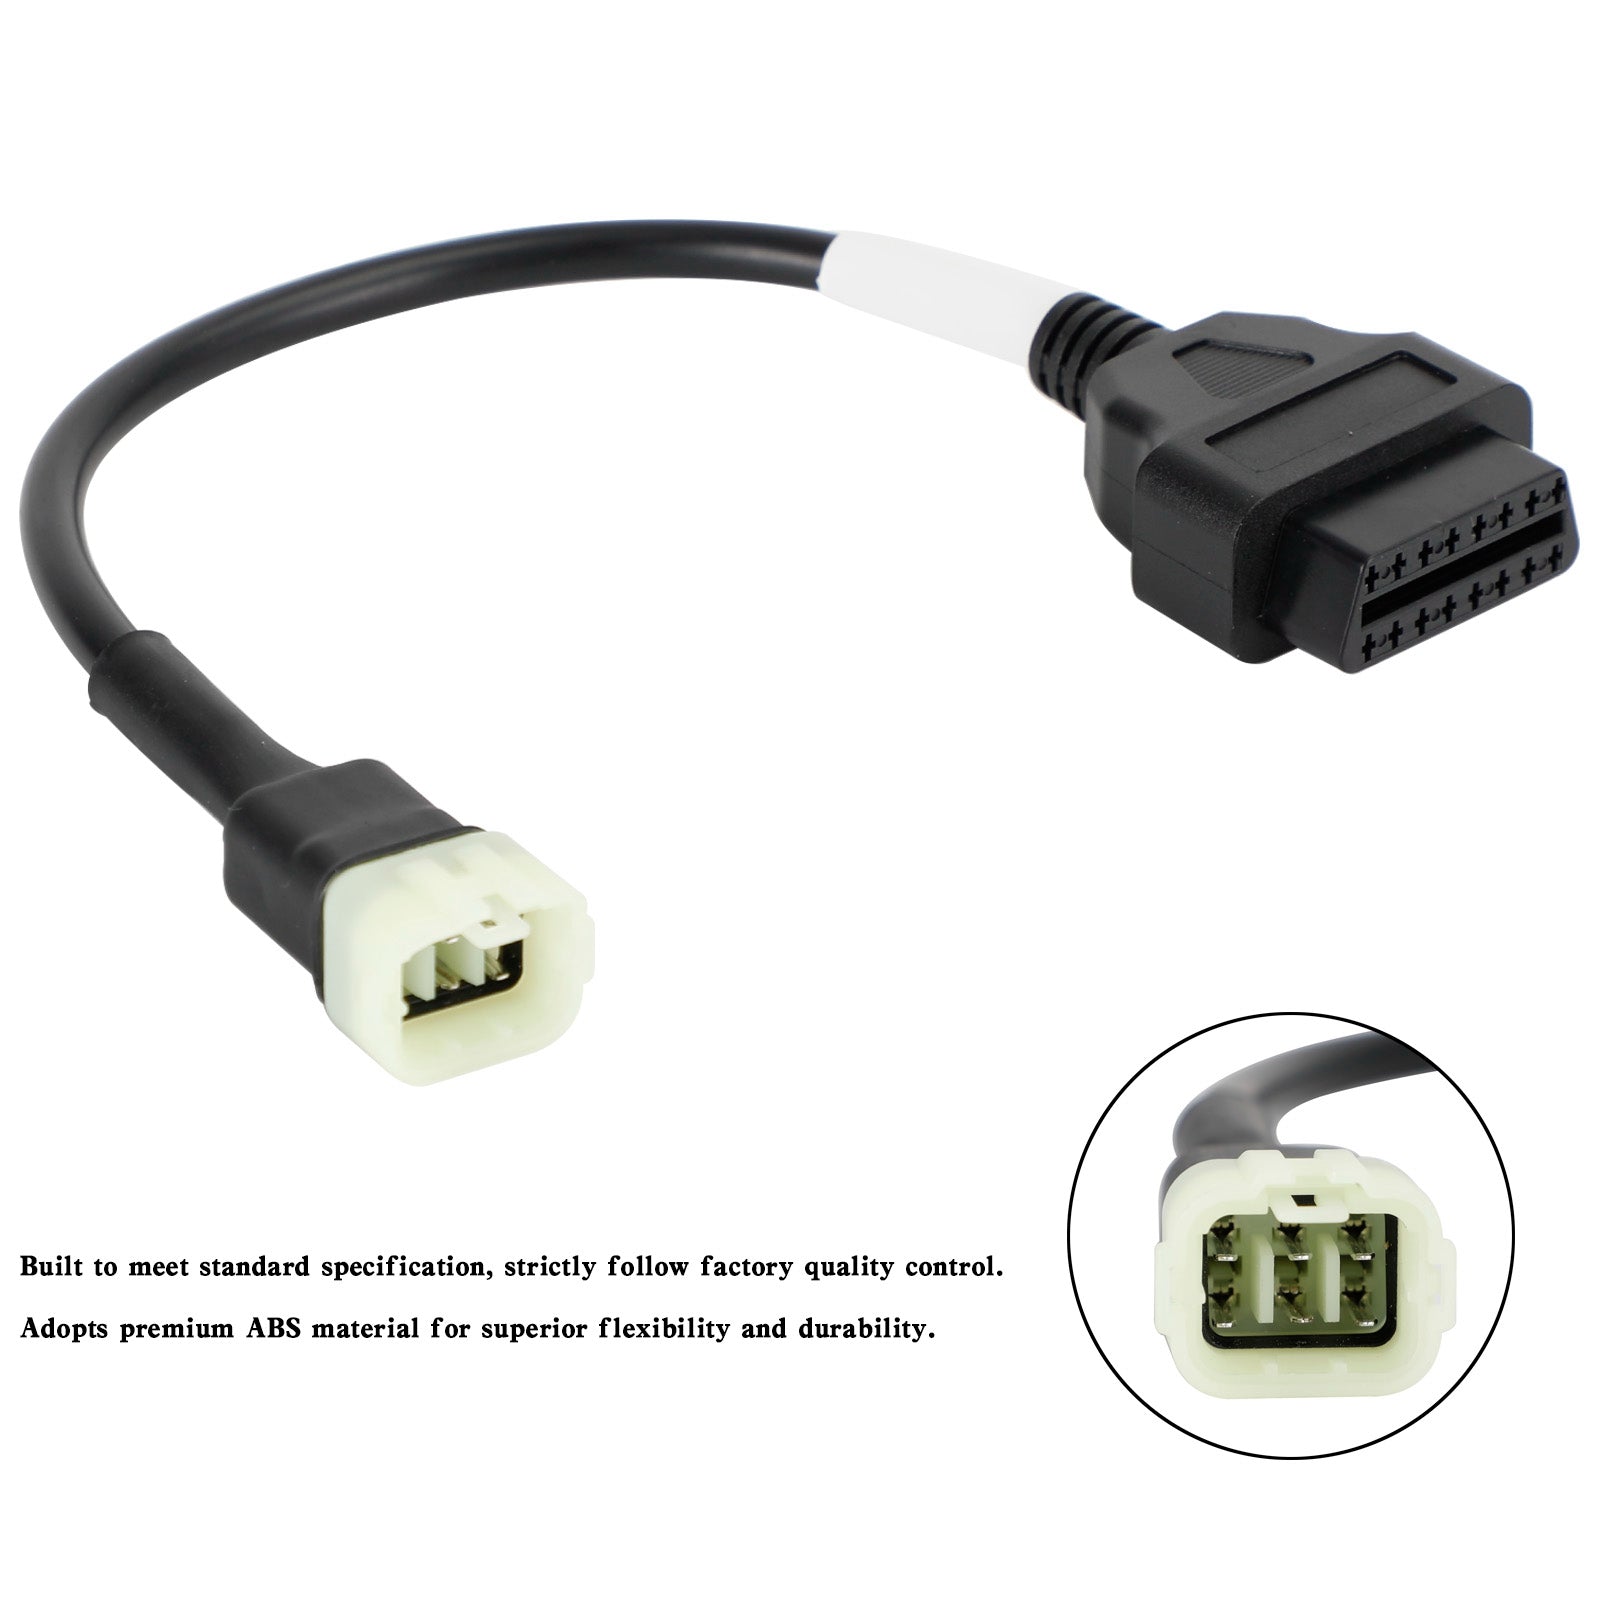 Motorcycle OBD Diagnostic 6 Pin 3 in 1 Plug Adaptor Cable Female